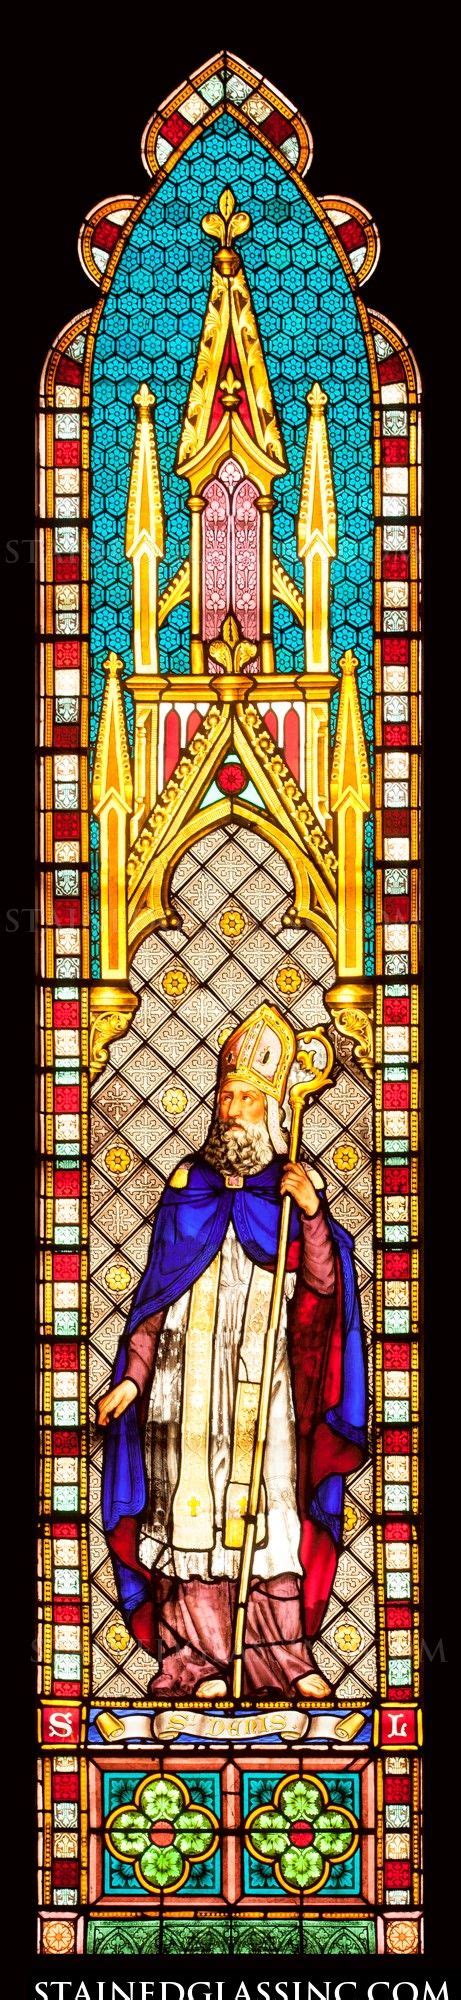 "Saint Denis Stained Glass Window" Religious Stained Glass Window